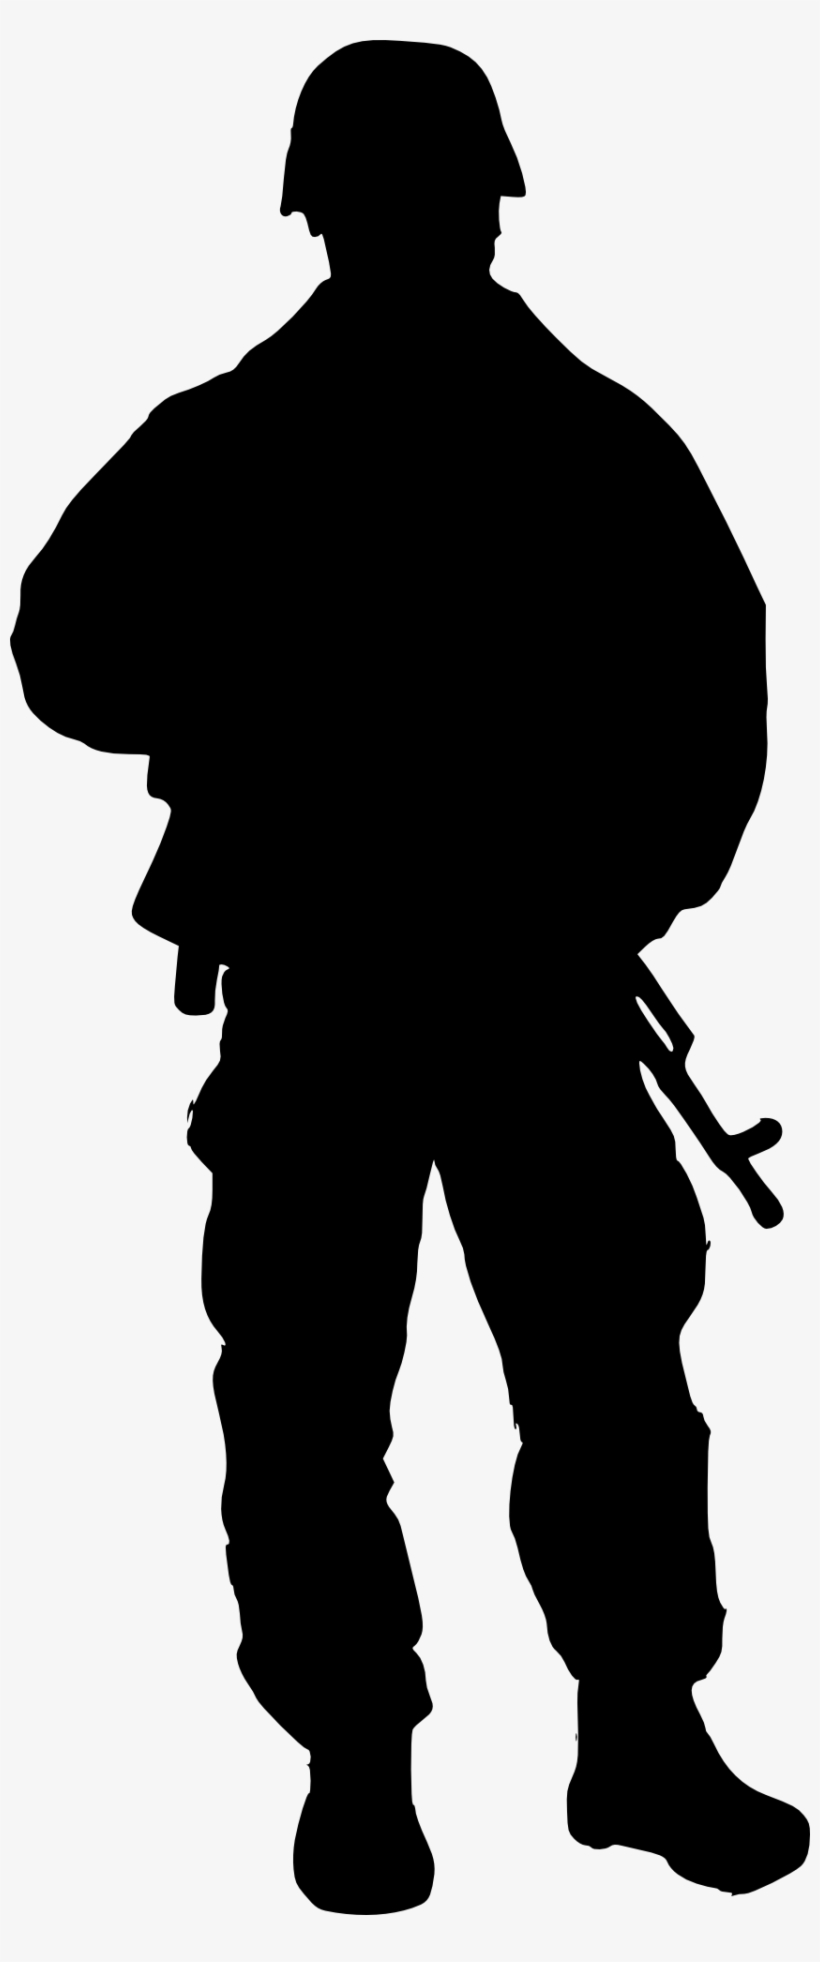 Free Download - Silhouette Png Black And White Soldier Png, transparent png #539062